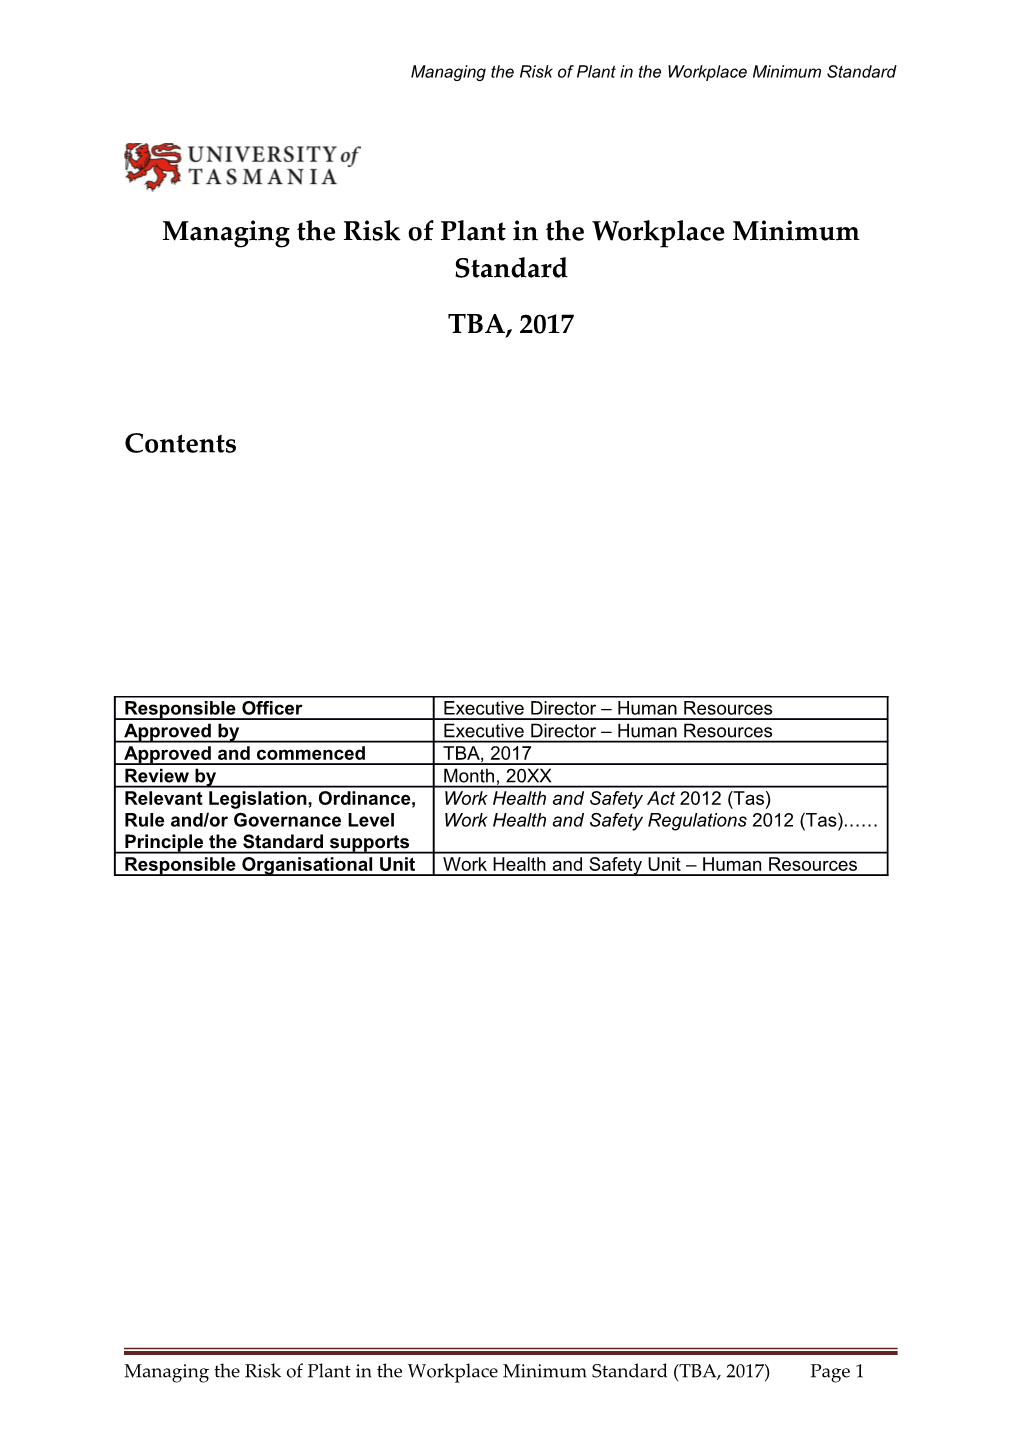 Managing the Risk of Plant in the Workplace Minimum Standard